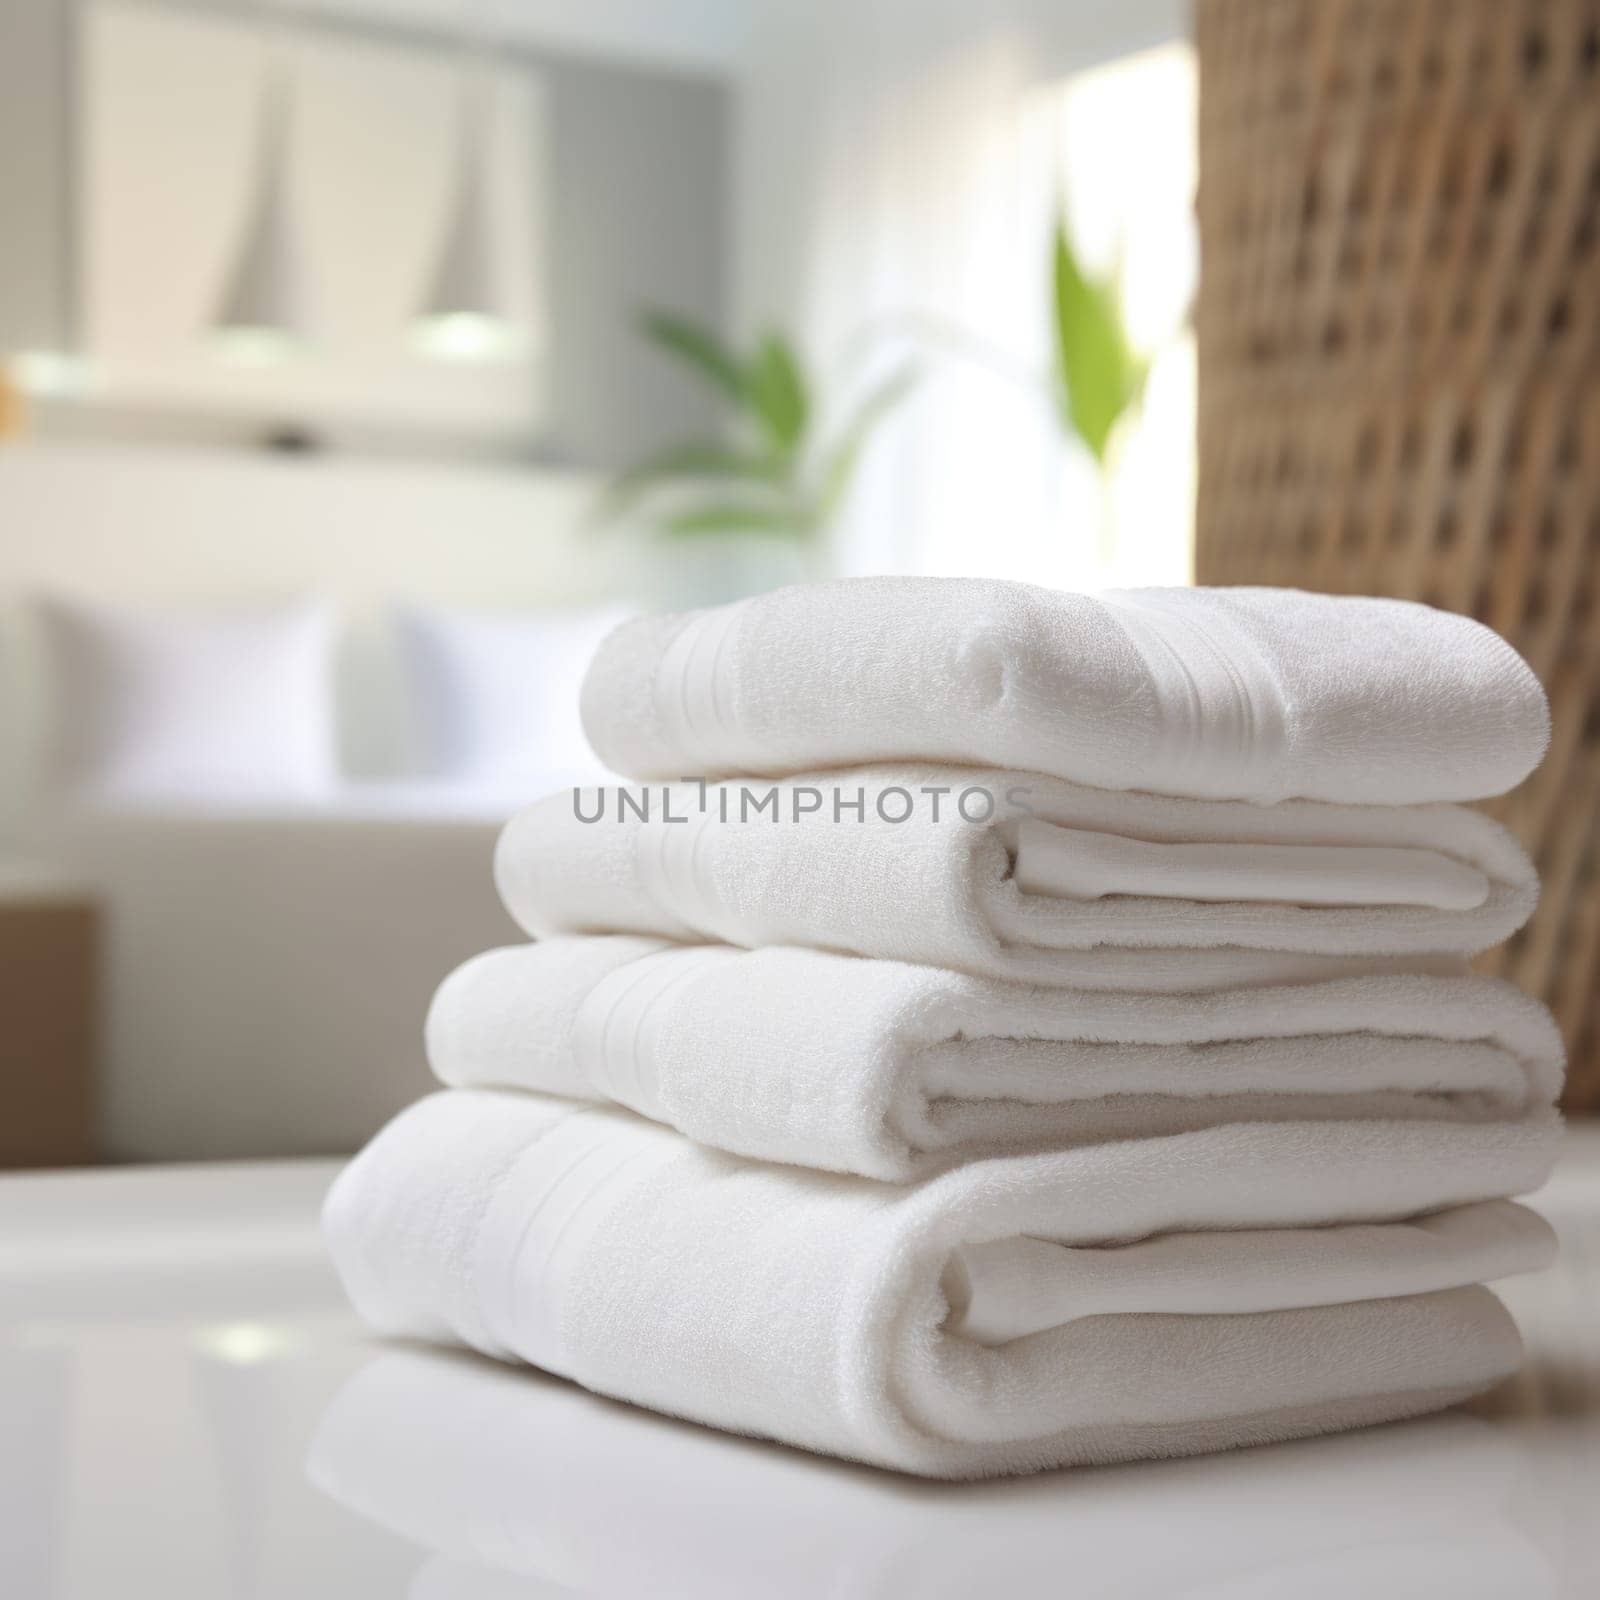 A stack of white towels on a table, AI by starush